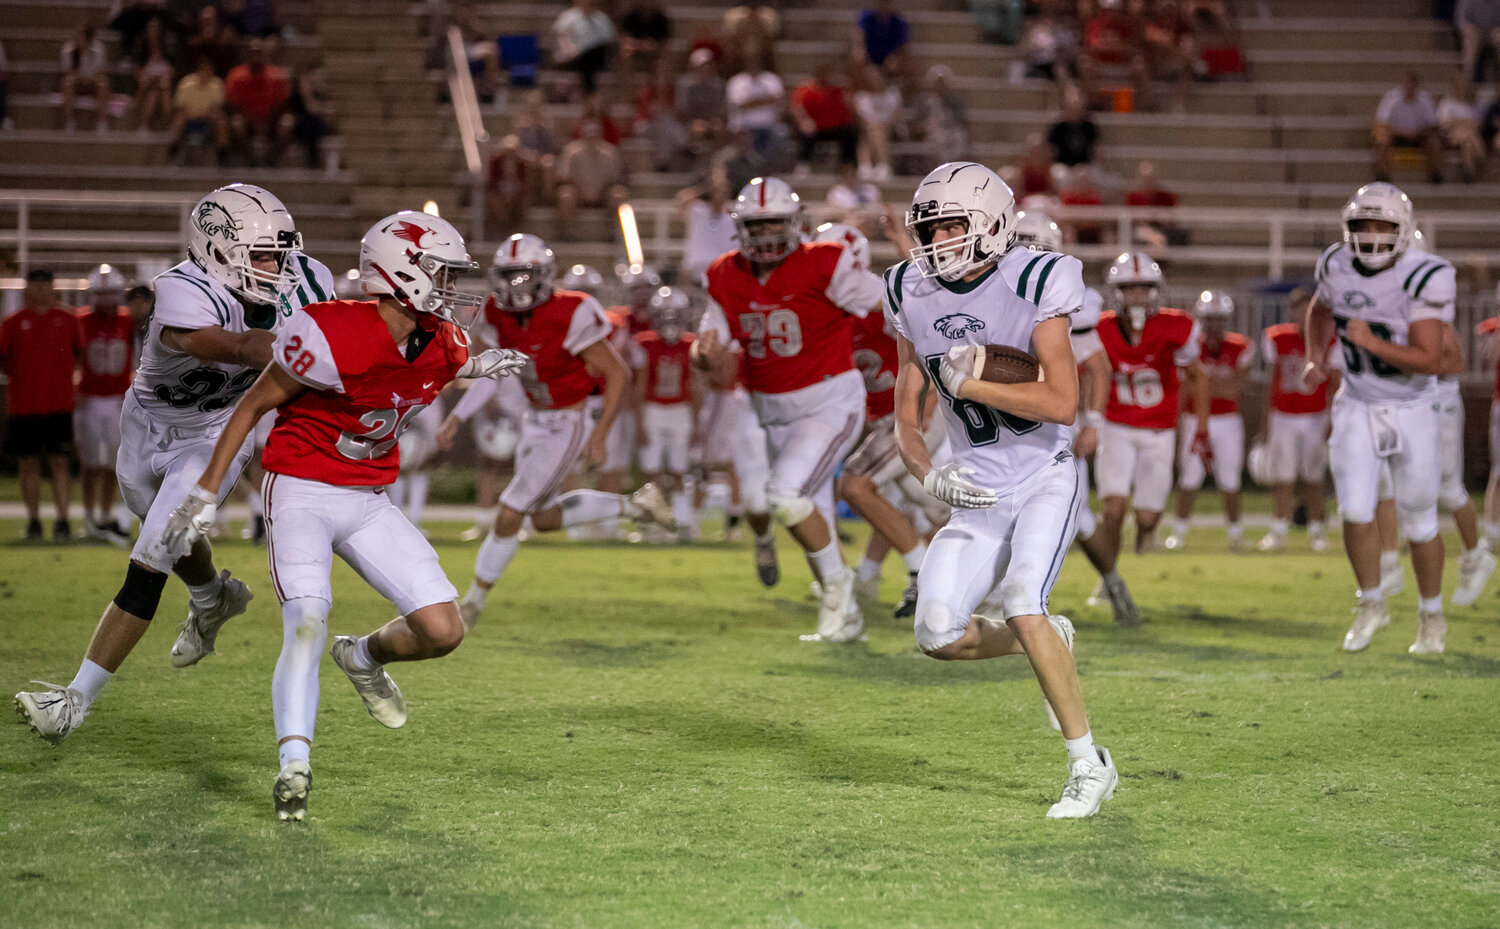 Eagle sophomore Ryland Bosarge runs after a second-half catch during Bayshore Christian’s JV game against the St. Michael Cardinals in Fairhope on Monday, Sept. 25.